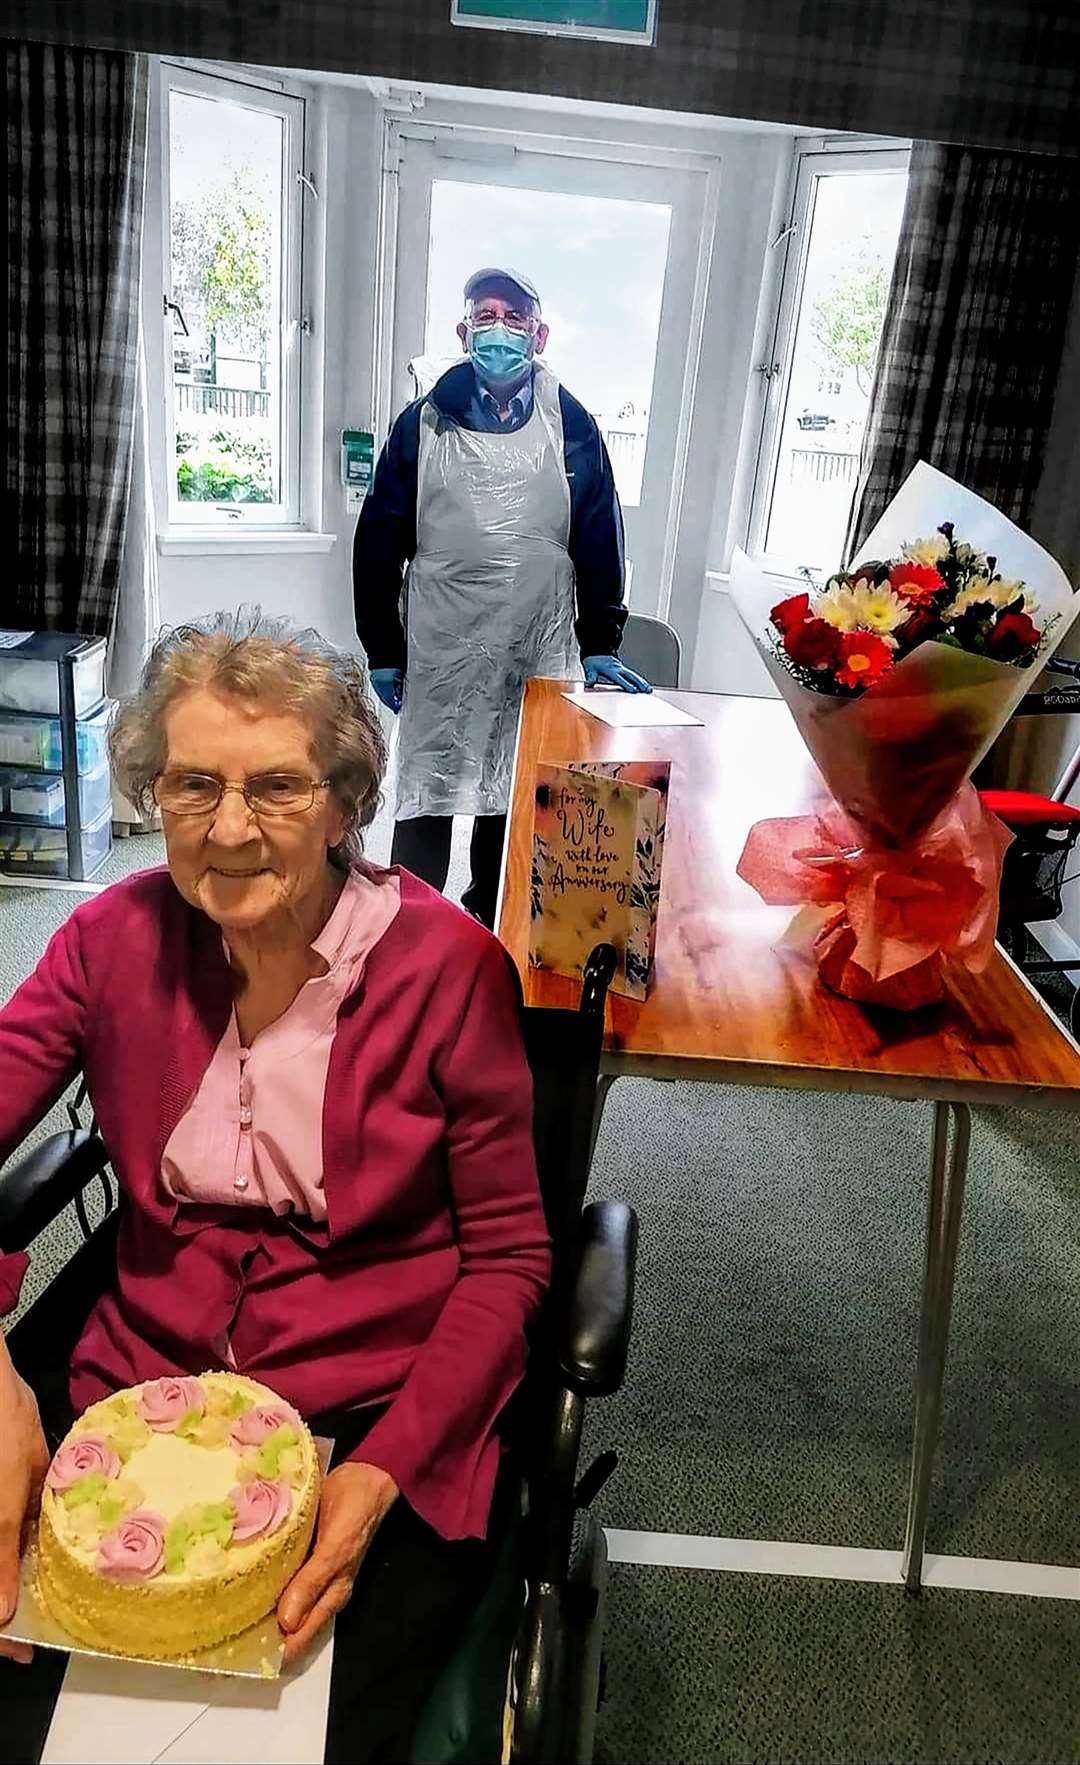 Alex and Margaret Cowie celebrate a socially distanced wedding anniversary at Parklands care home.